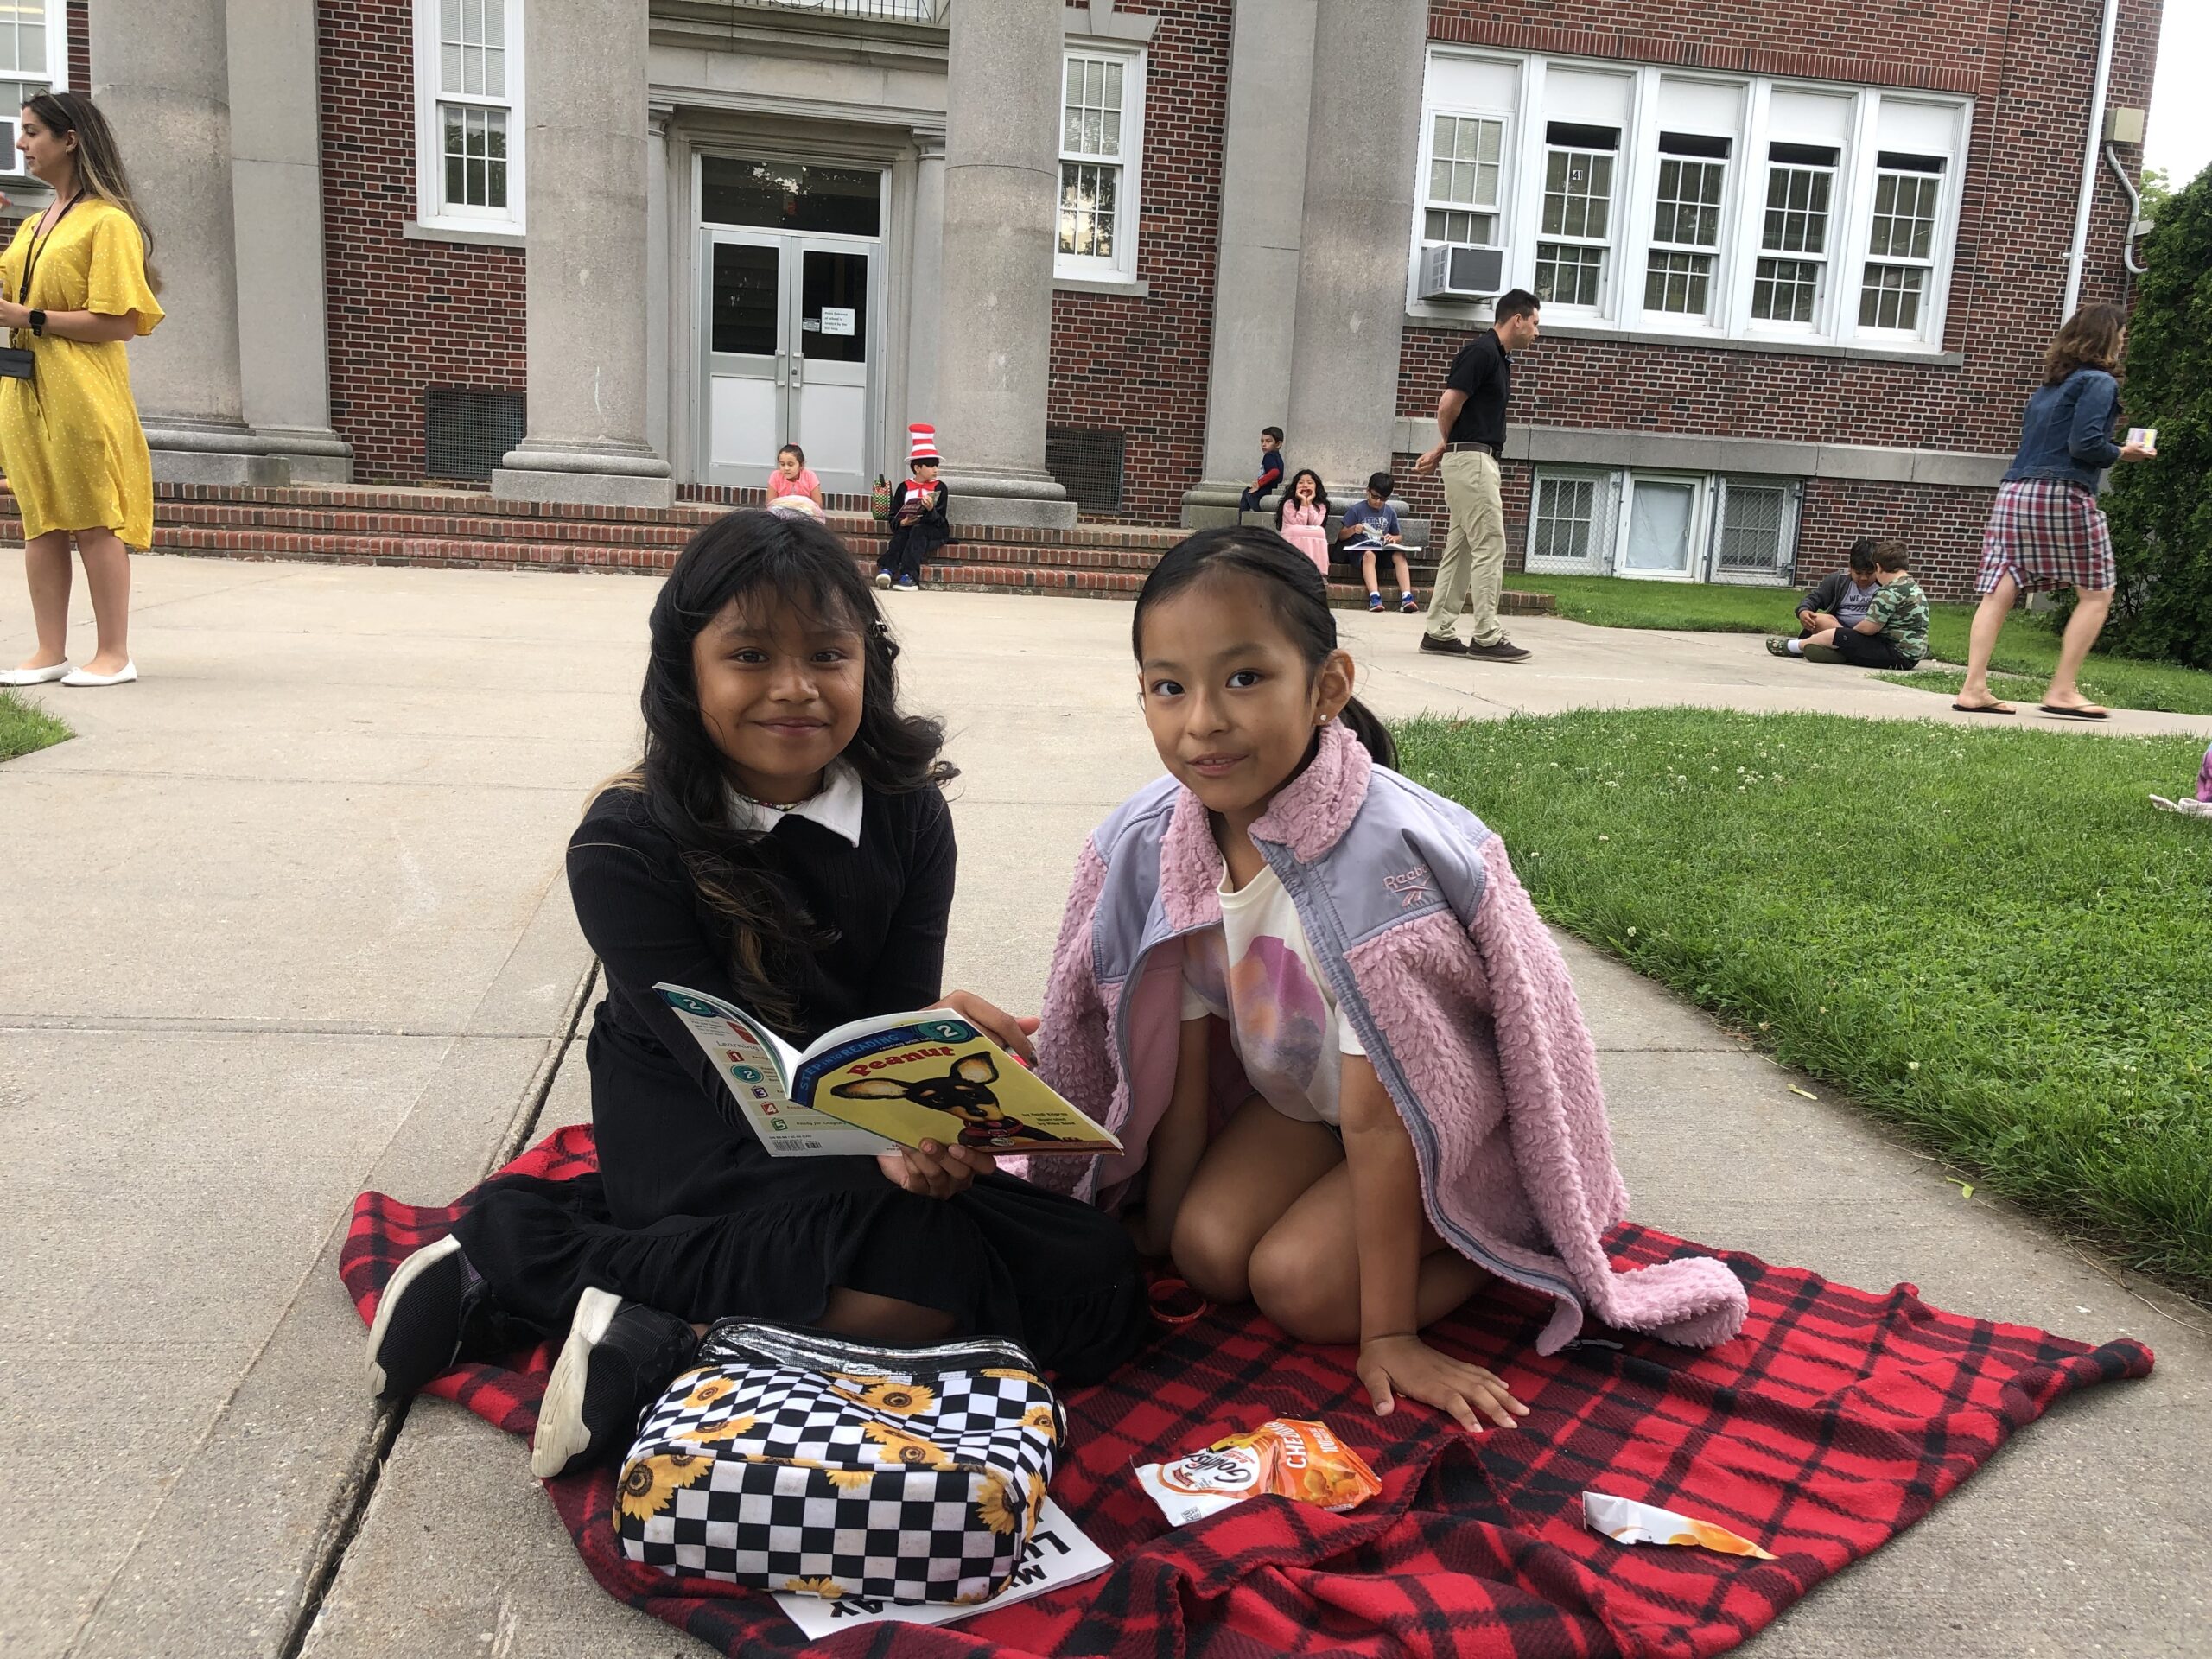 To foster a love of reading in fellow students, Amy McNamara’s fourth graders at Hampton Bays Elementary School spent a sunny afternoon reading to their first grade buddies.  Mia Soledad, left, with Daphne Chiliquinga on reading day. COURTESY HAMPTON BAYS SCHOOL DISTRICT